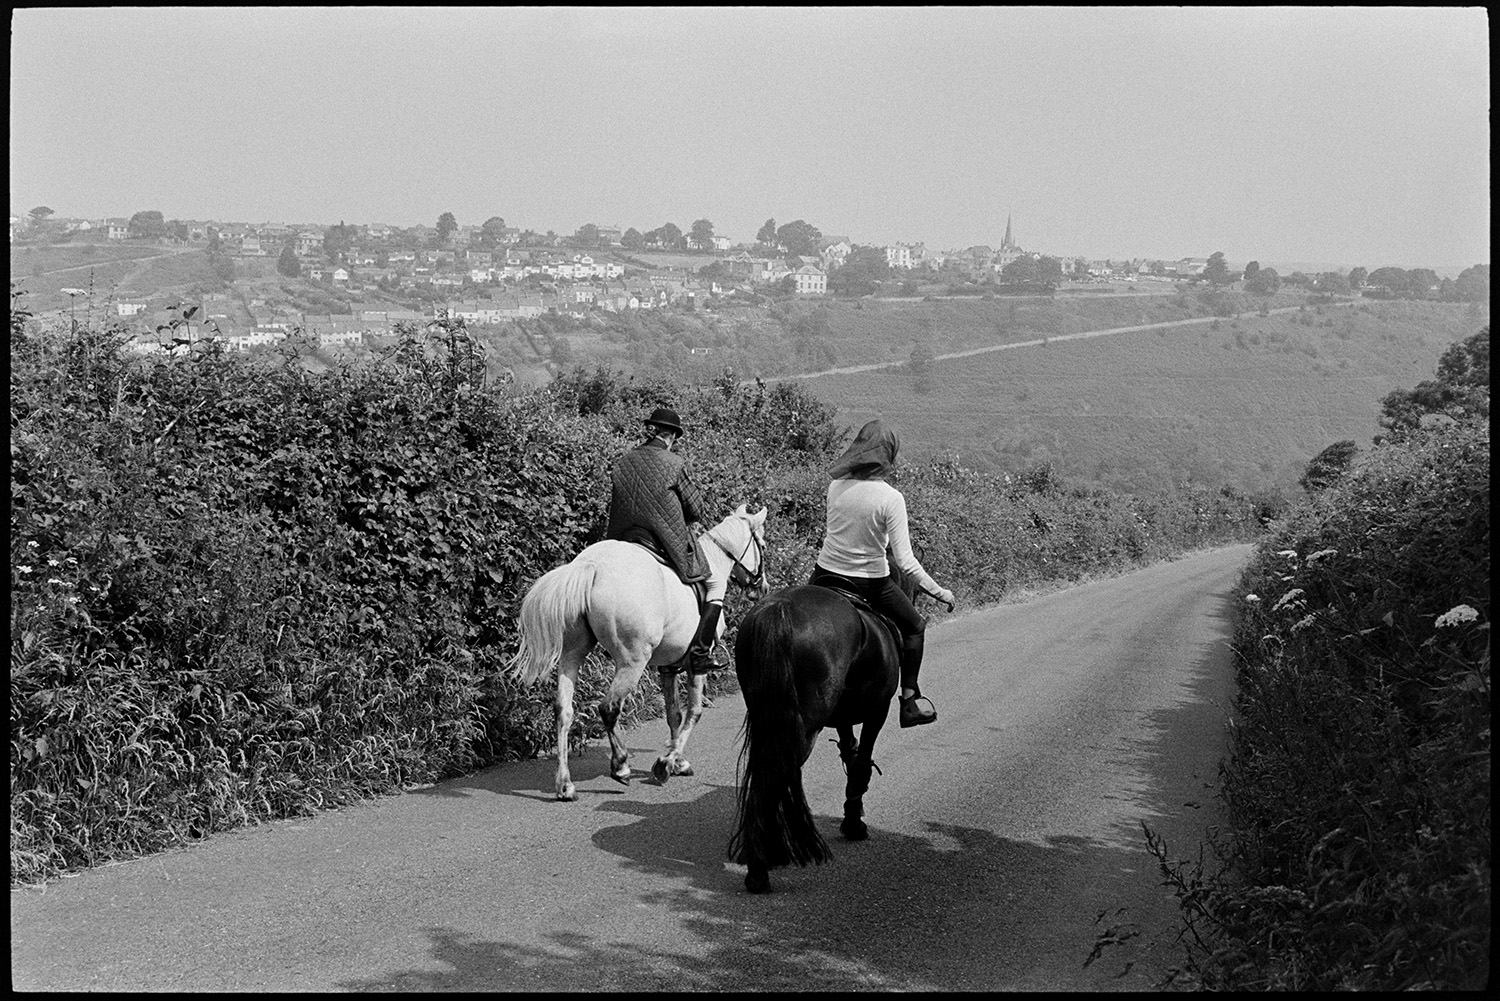 Two horses in road. 
[Two people riding horses along a hedge lined road near Torrington. The town of Torrington can be seen in the distance.]